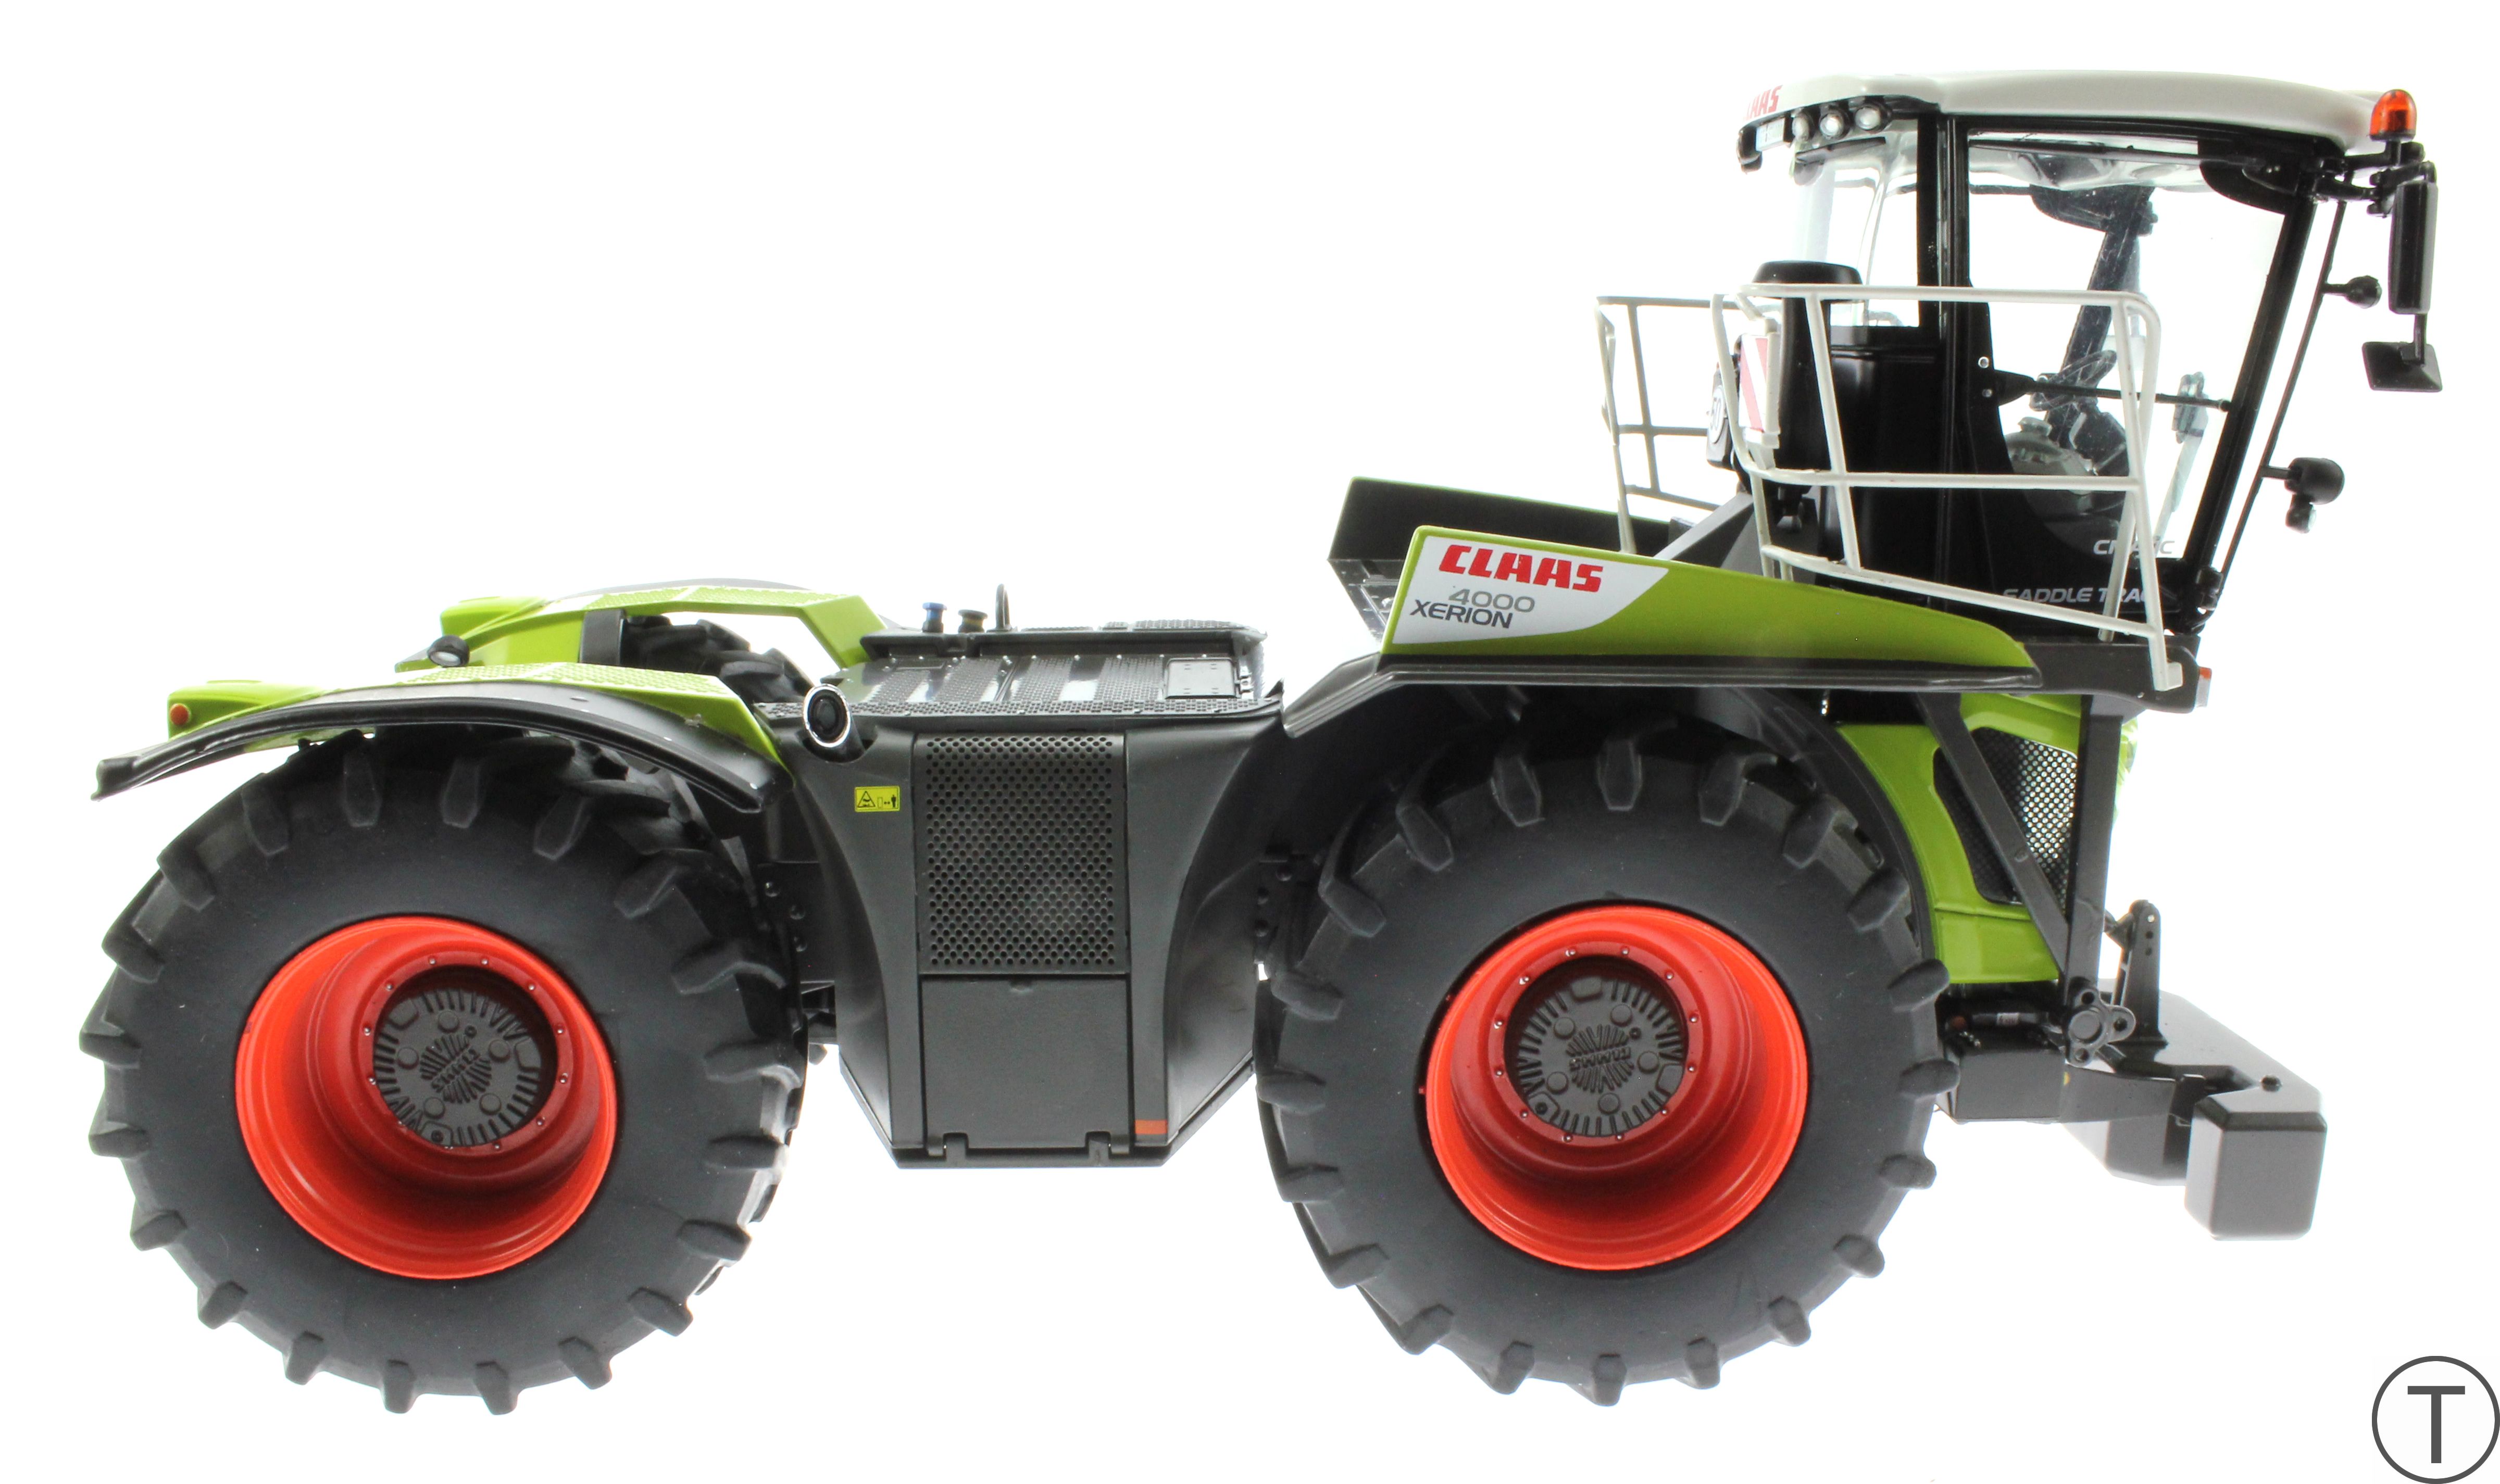 Weise-Toys 1030 - Claas Xerion 4000 Saddle Trac - Claas Edition